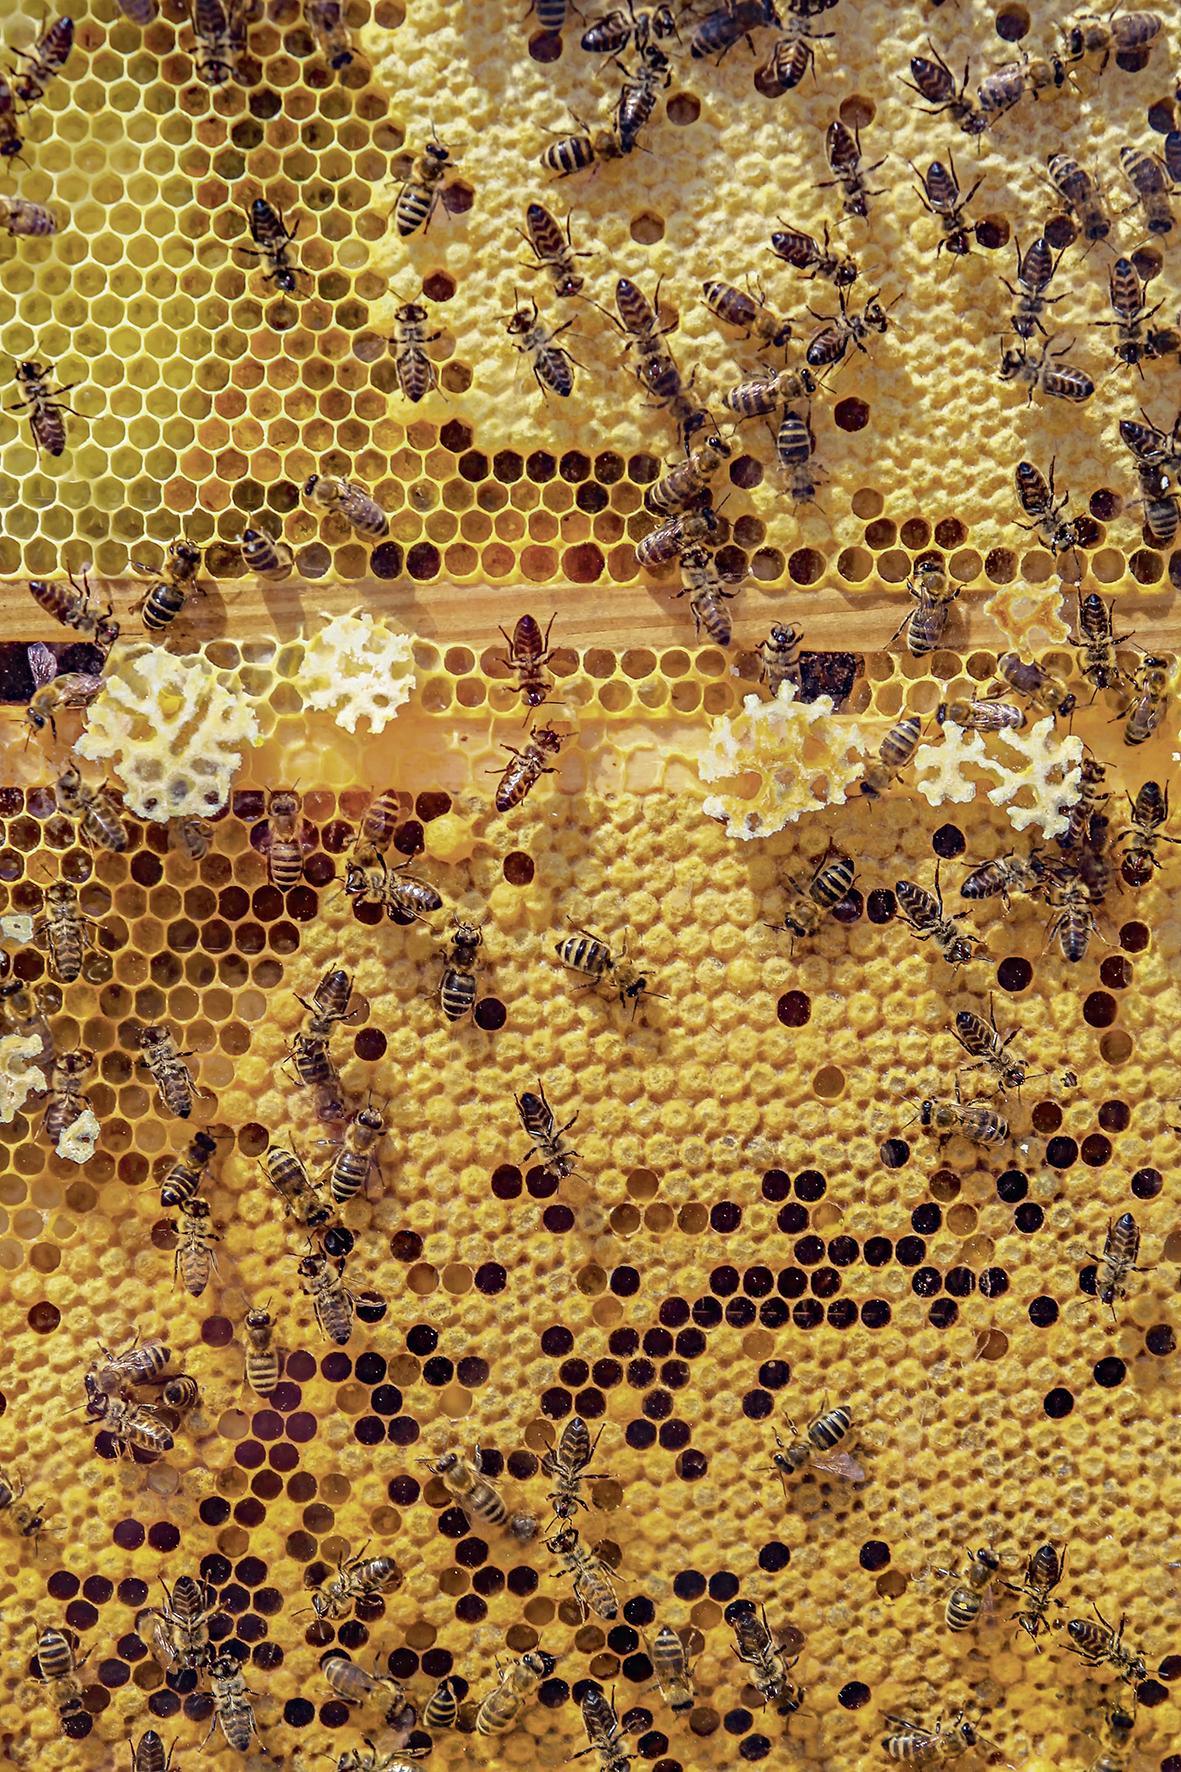 COLORBOND® steel. Tree Change. flatlay inspiration.  Bees in a beehive making honeycomb